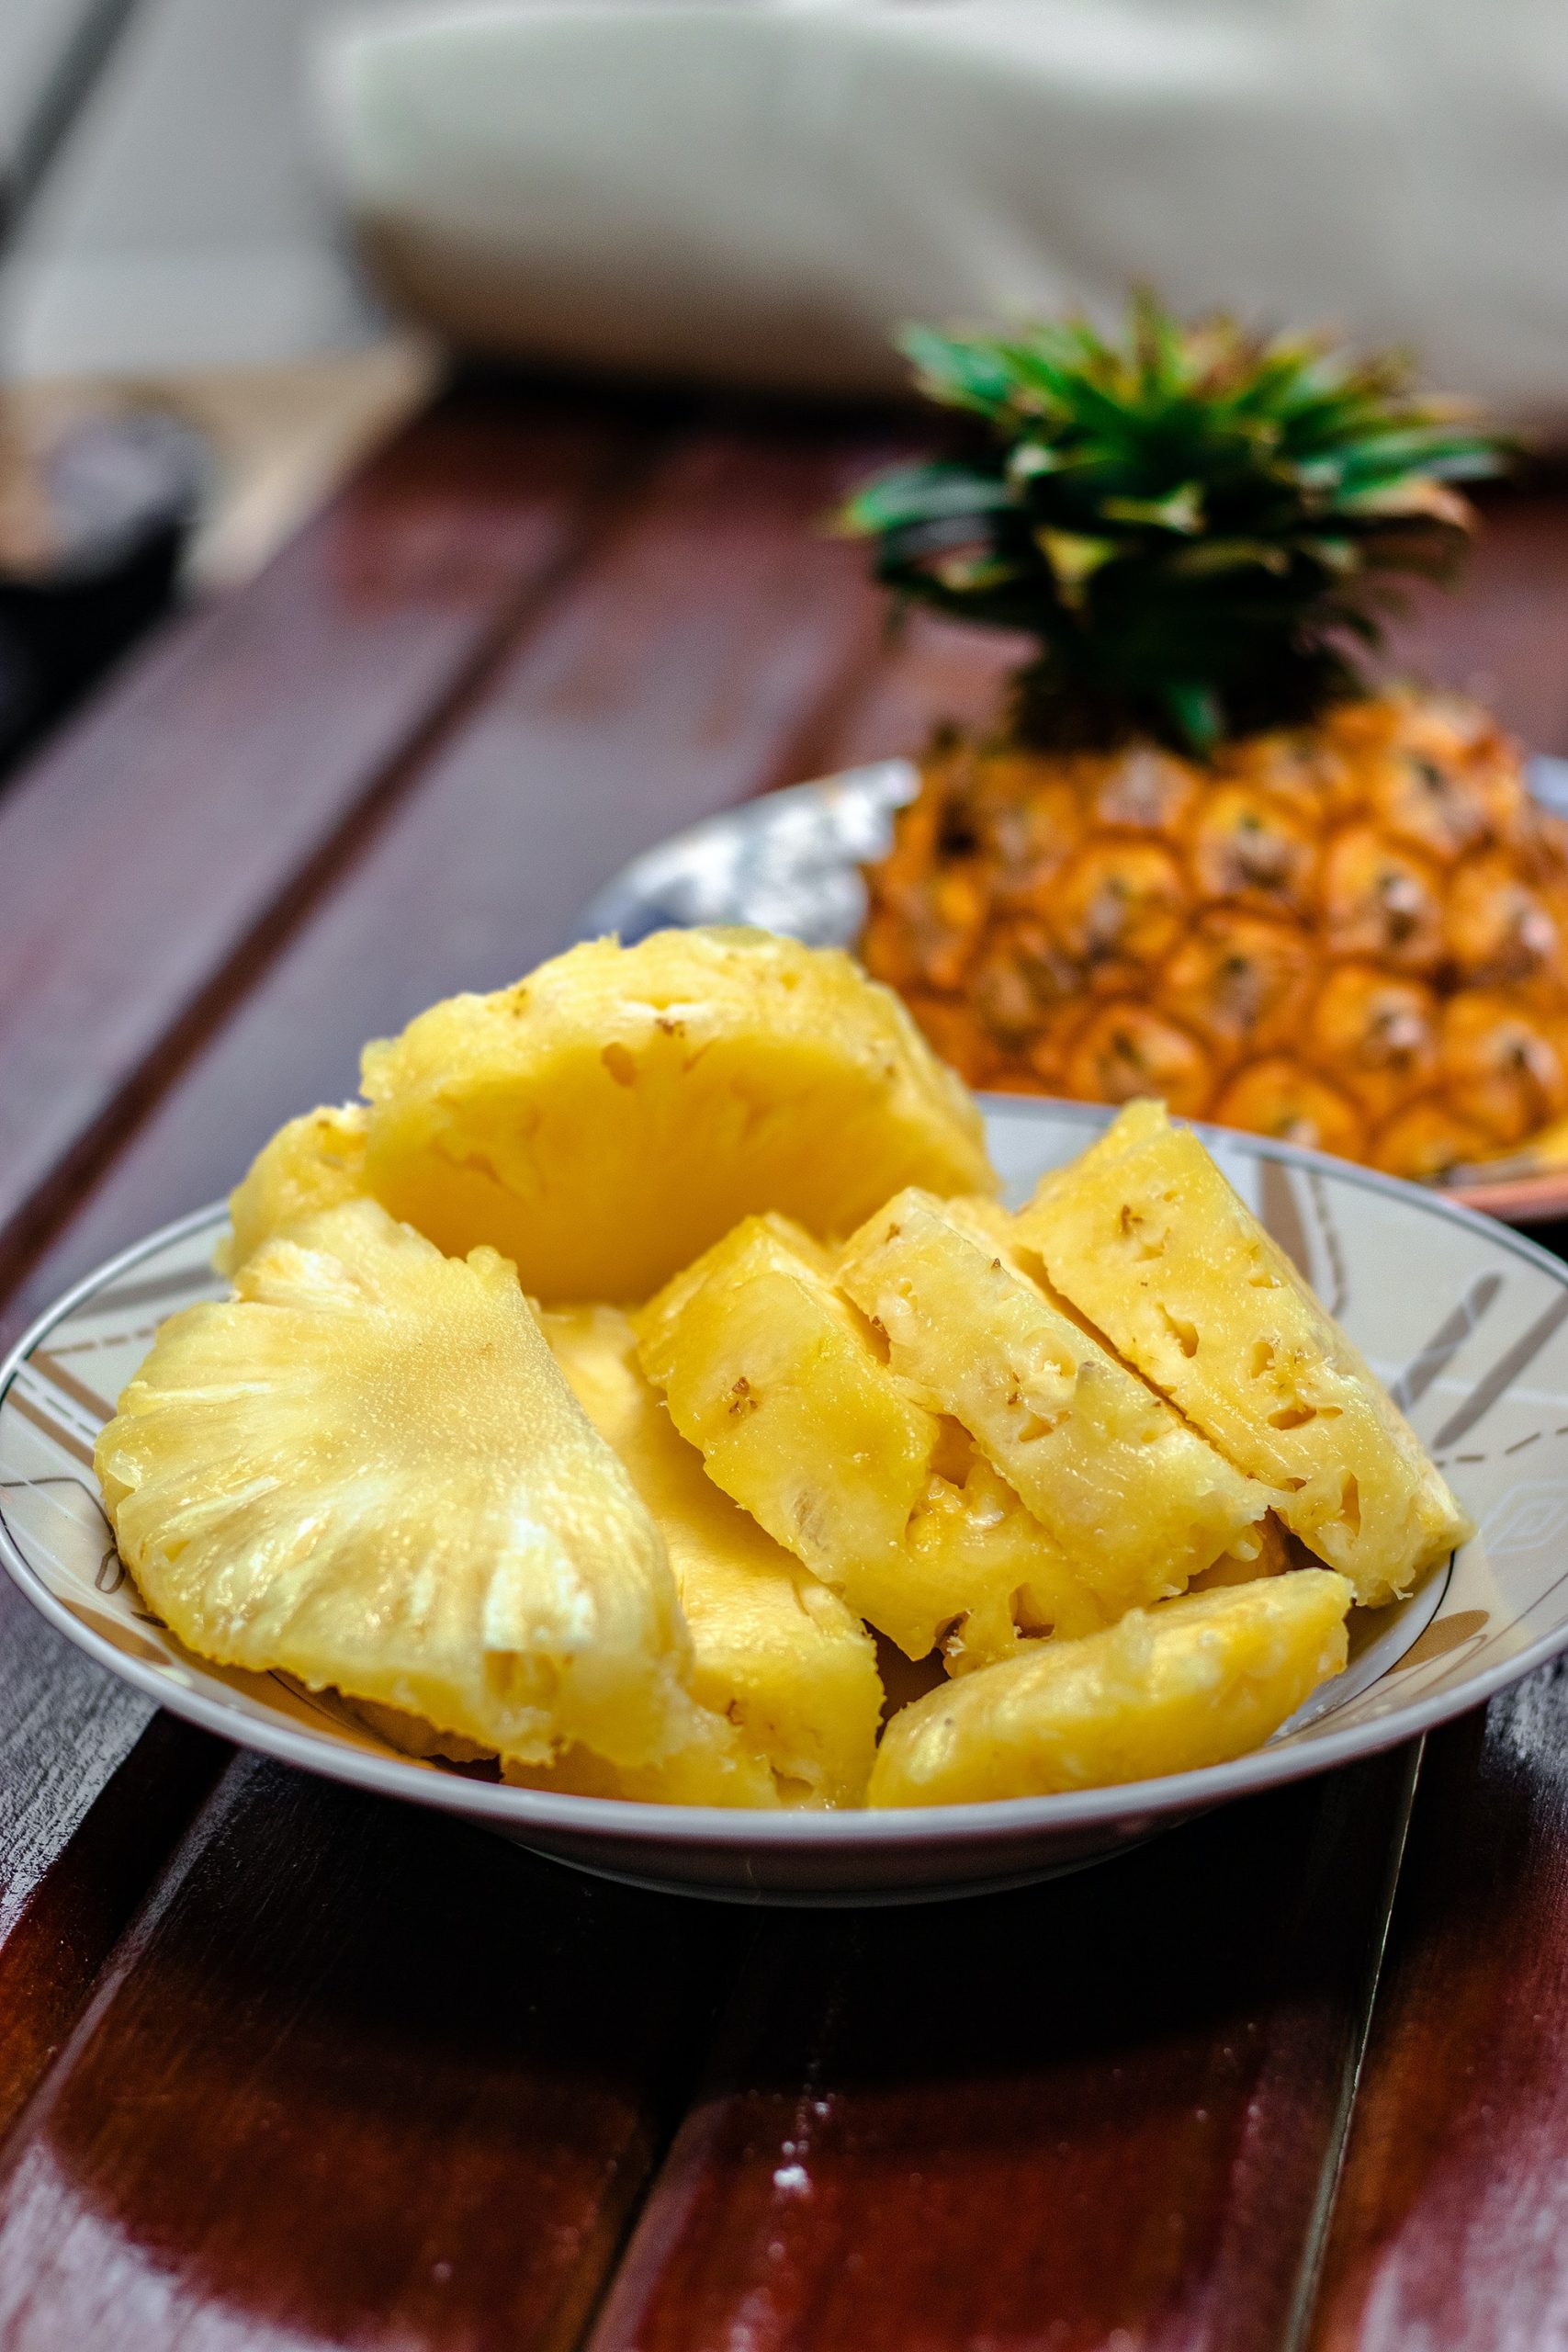 Giveaway: 25 Pounds of Maui Gold Pineapple